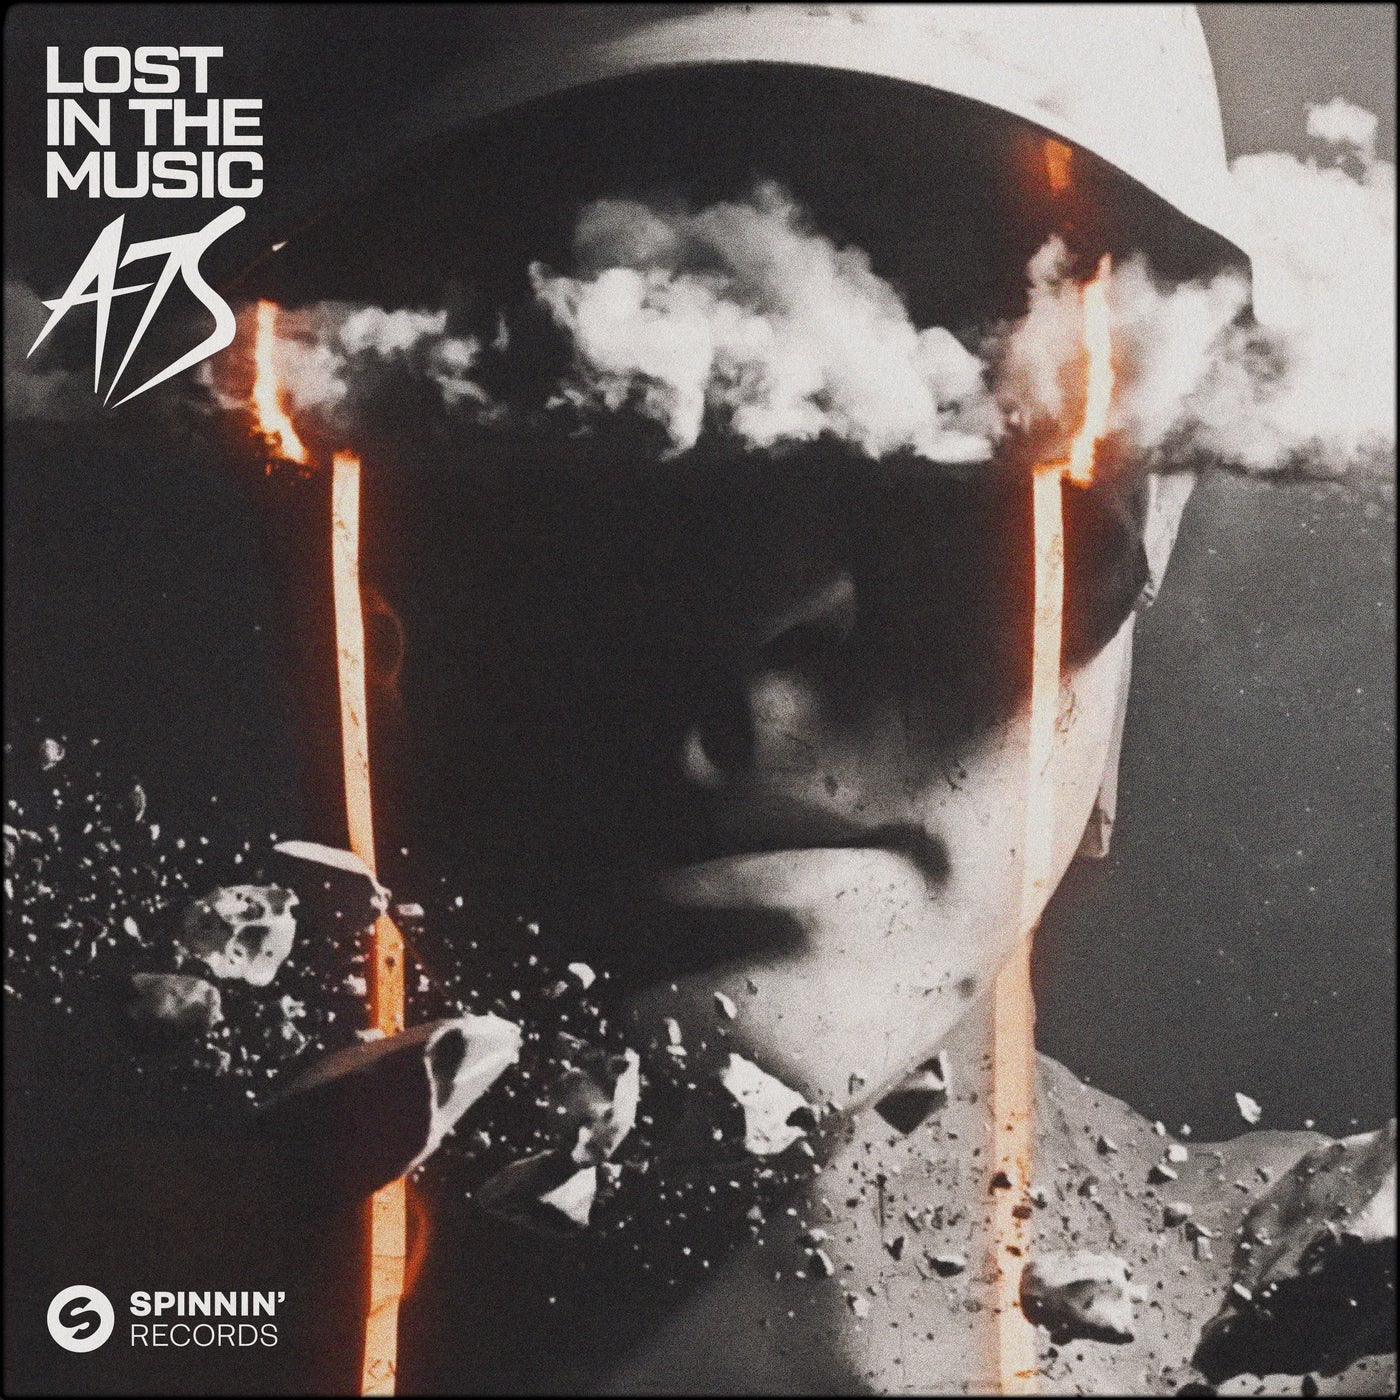 A7S - Lost In The Music (Extended Mix) [SPINNIN' RECORDS] | Music ...